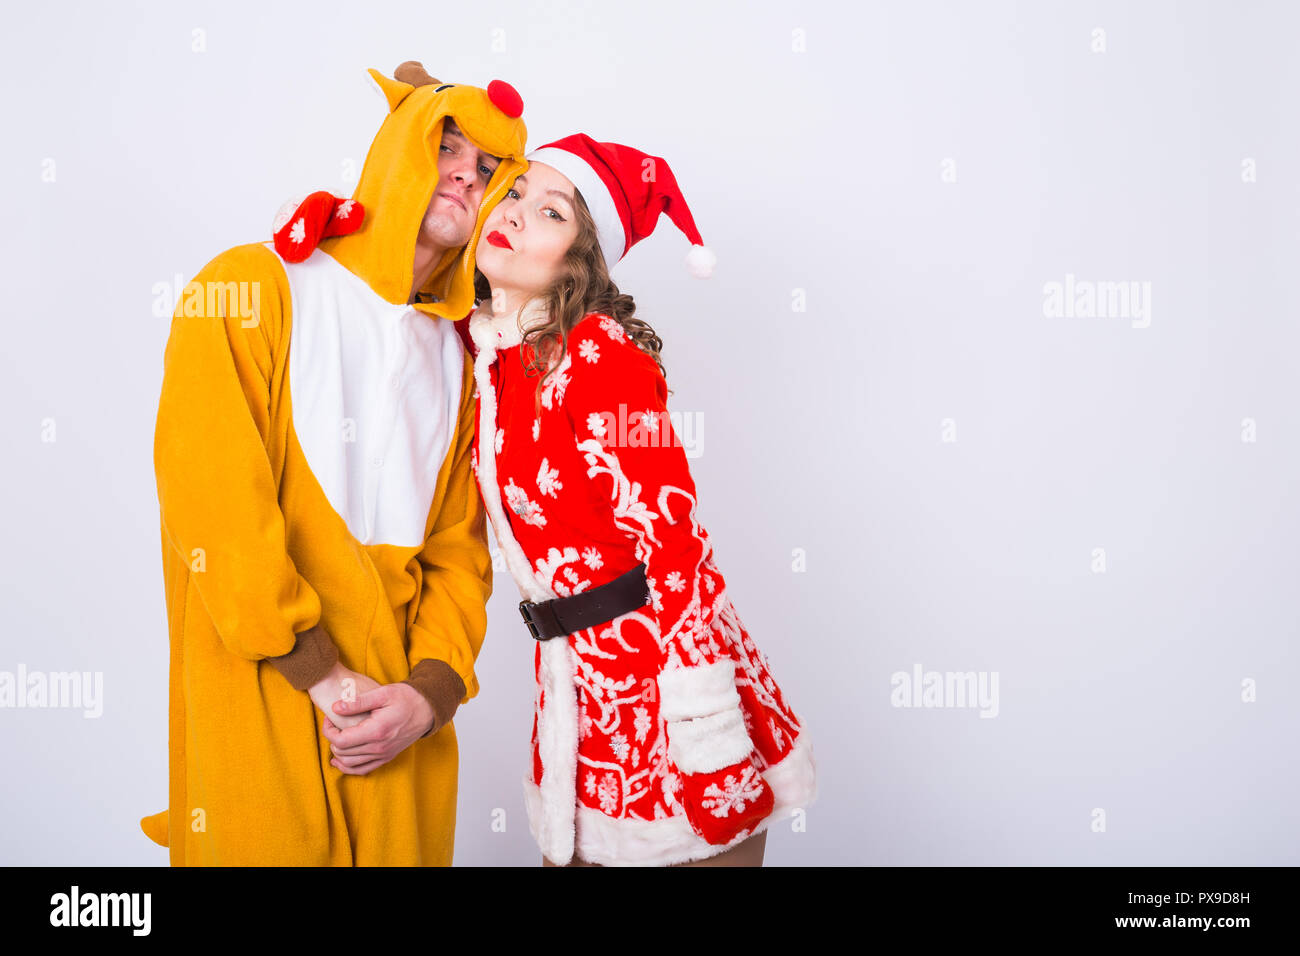 Holiday, Christmas and carnival concept - Funny couple in deer costume and Santa Claus costume have fun on white background with copy space Stock Photo